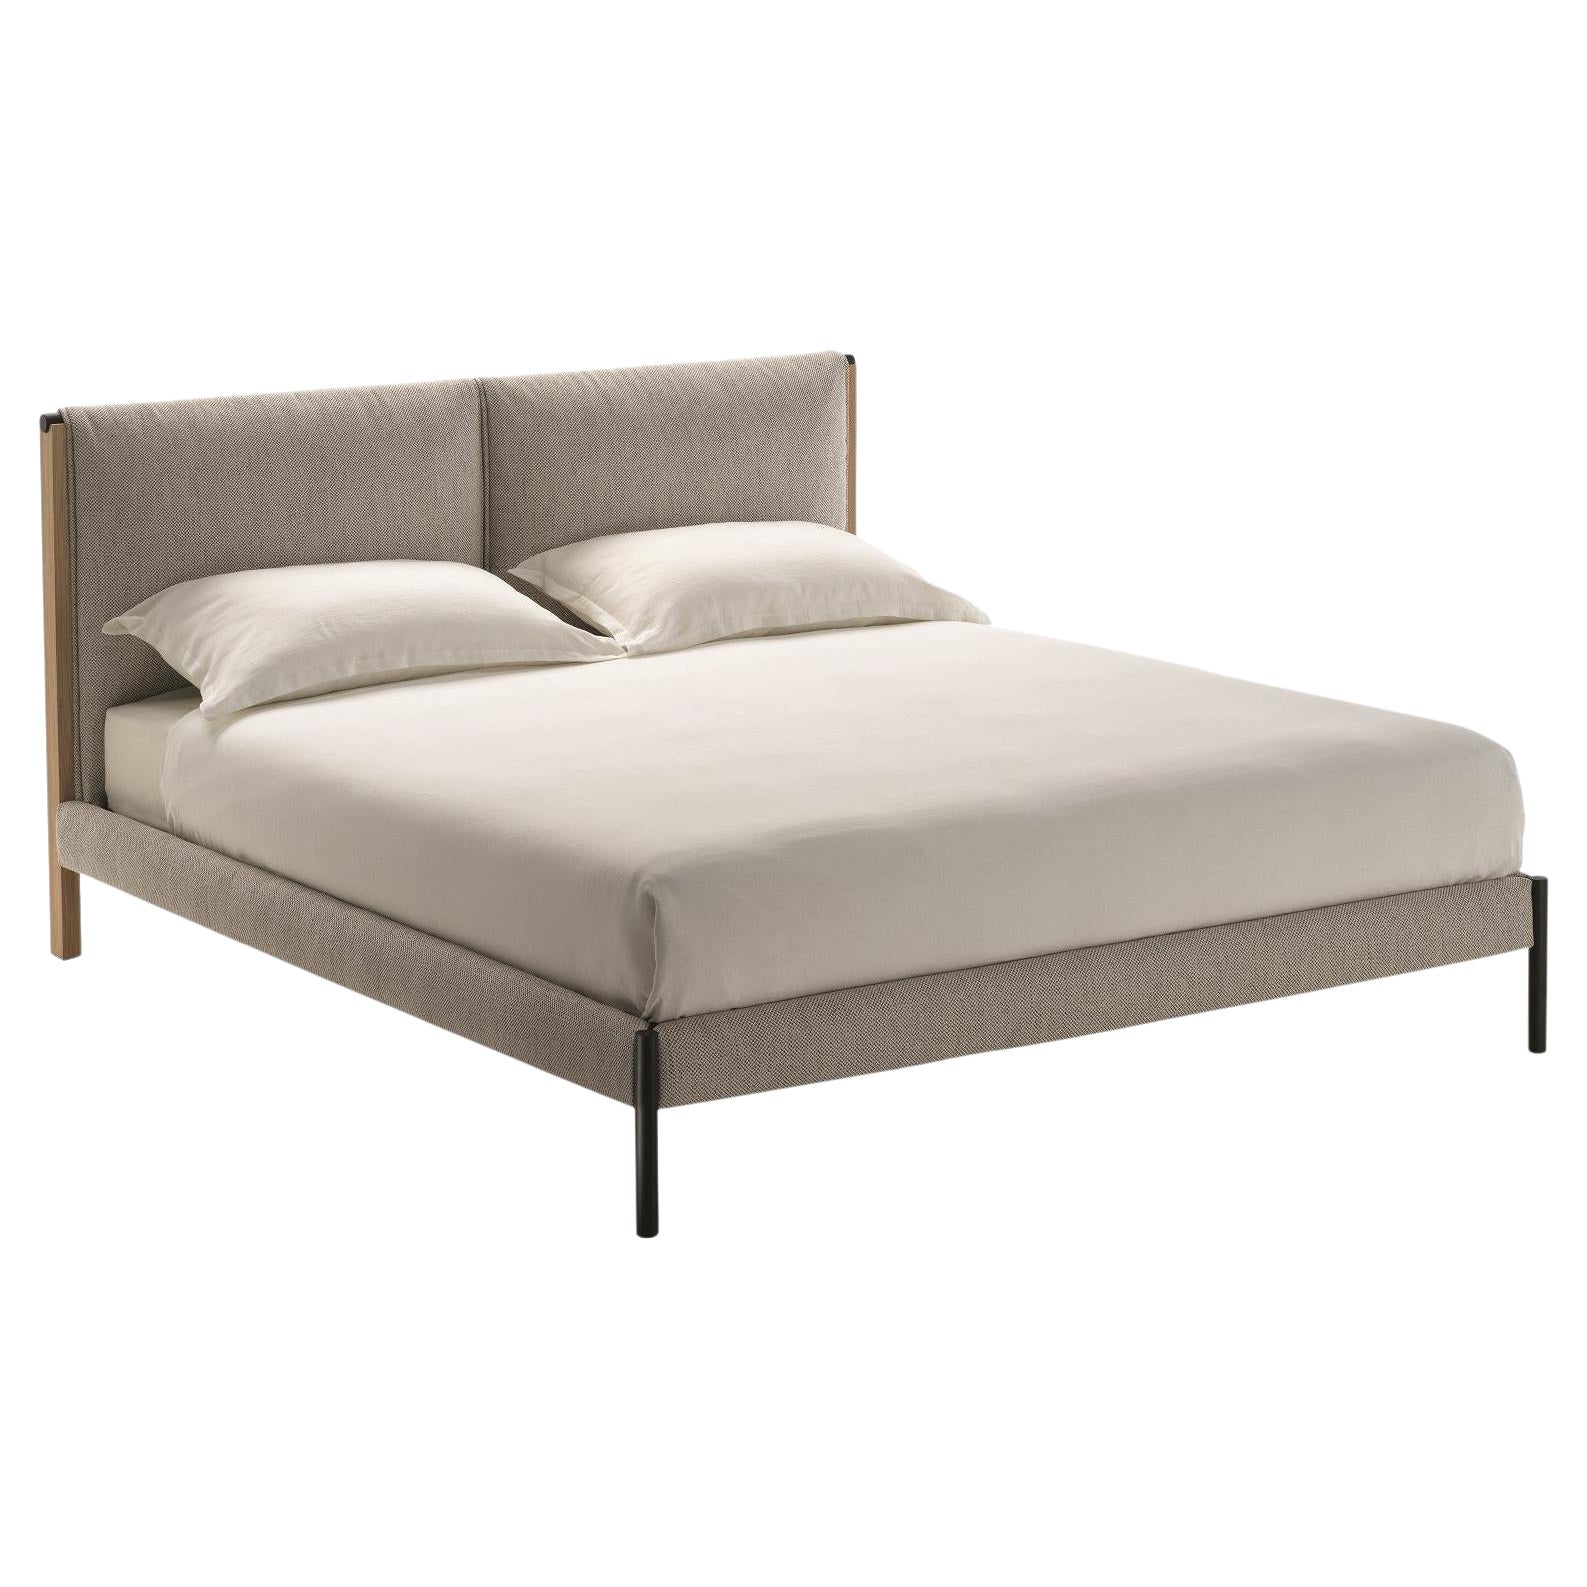 Zanotta Large Ricordi Bed with Separate Springing in Toce Upholstery For Sale